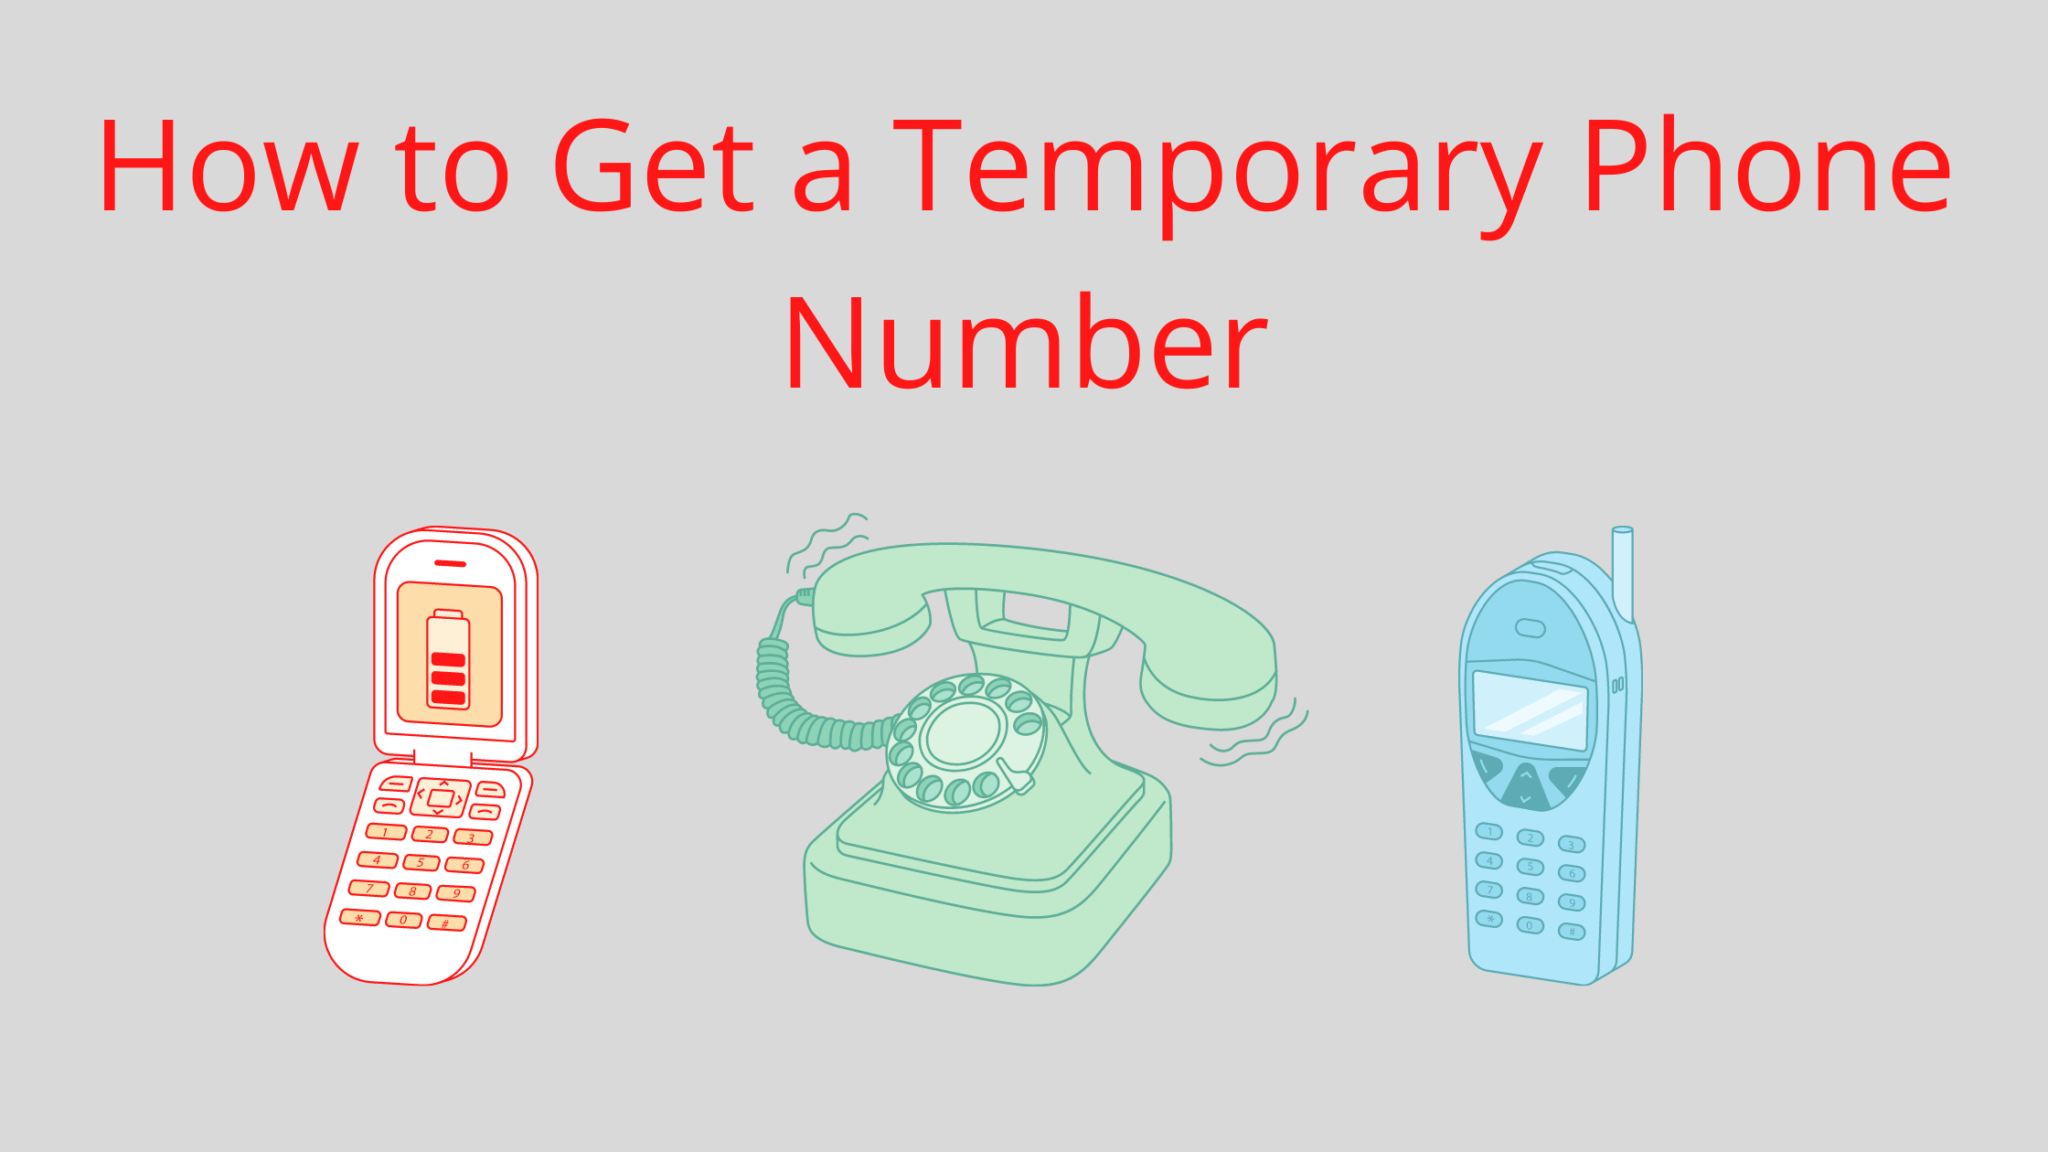 How to Get a Free Temporary Phone Number Online